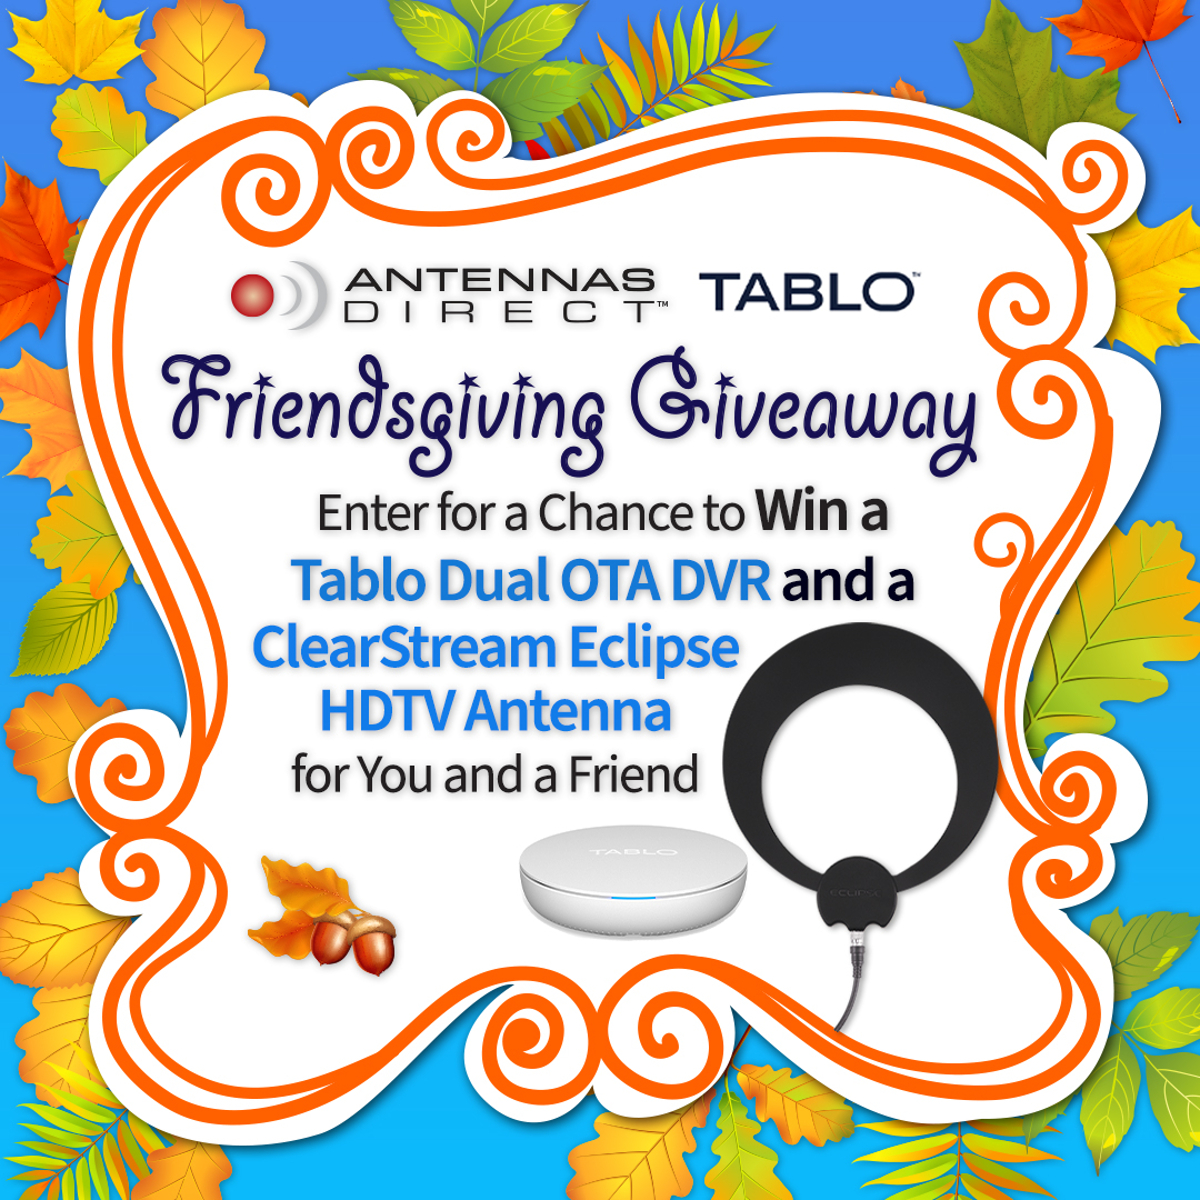 Enter Antennas Direct’s Friendsgiving Giveaway For a Chance to Win a Tablo DVR and ClearStream Antenna